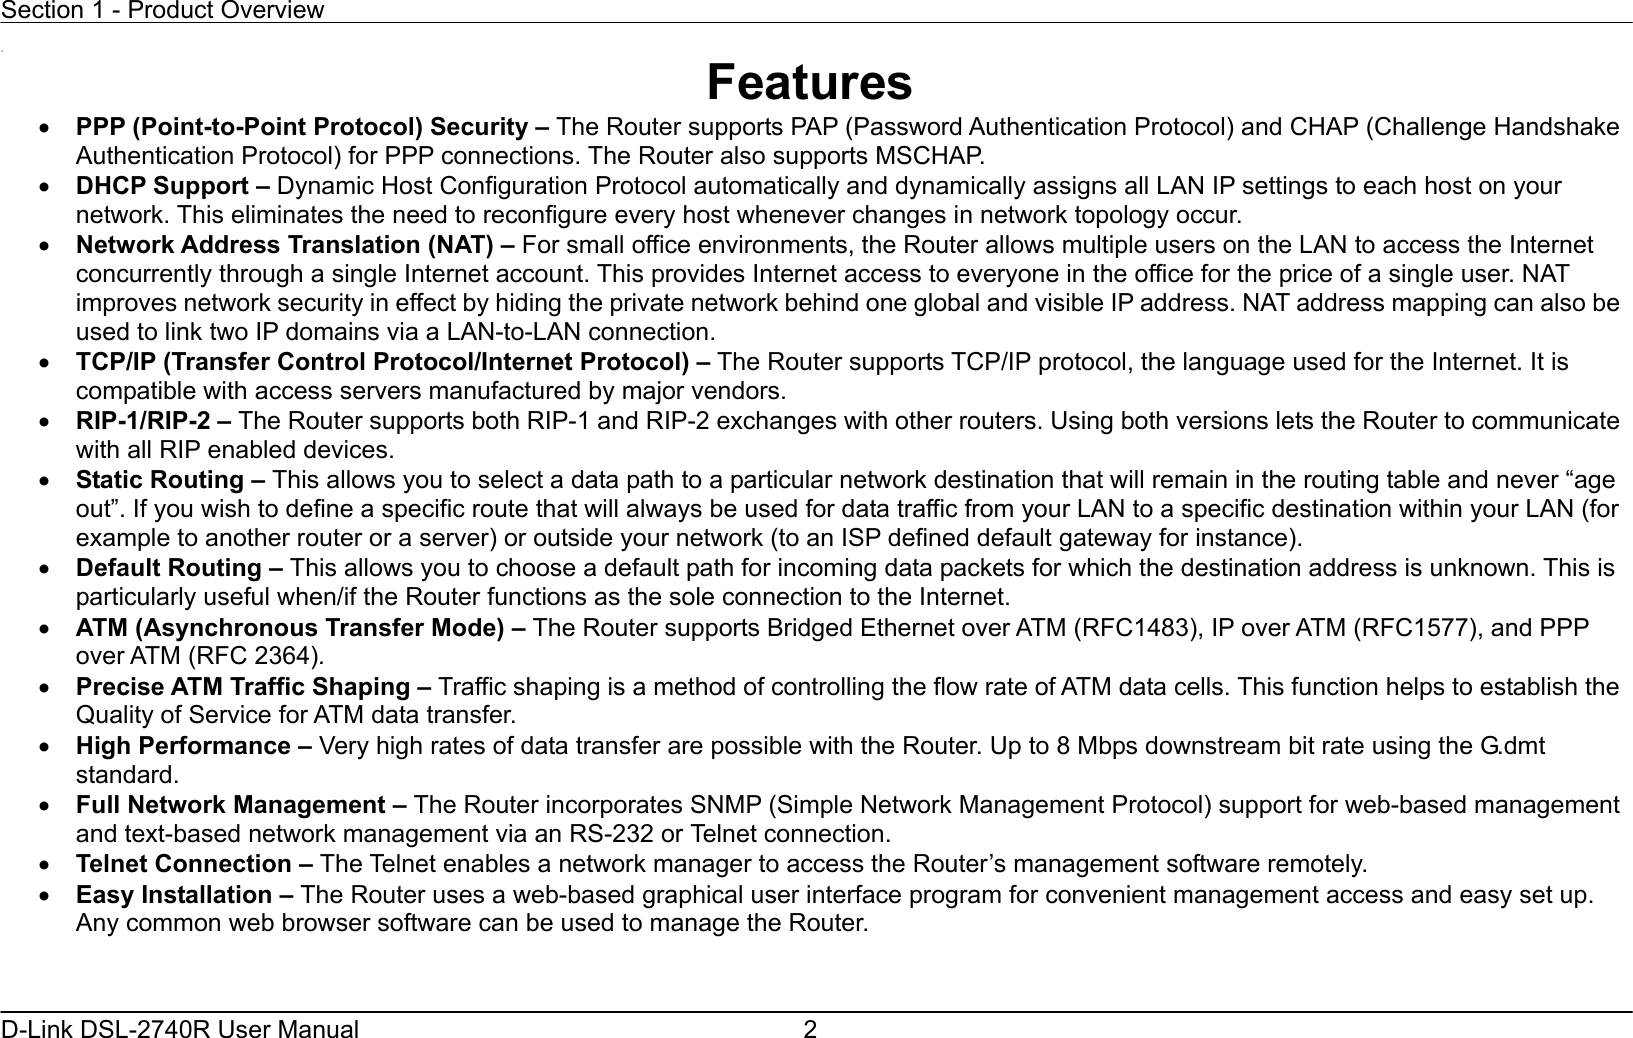 Section 1 - Product Overview  D-Link DSL-2740R User Manual  2 11 Features •  PPP (Point-to-Point Protocol) Security – The Router supports PAP (Password Authentication Protocol) and CHAP (Challenge Handshake Authentication Protocol) for PPP connections. The Router also supports MSCHAP. •  DHCP Support – Dynamic Host Configuration Protocol automatically and dynamically assigns all LAN IP settings to each host on your network. This eliminates the need to reconfigure every host whenever changes in network topology occur. •  Network Address Translation (NAT) – For small office environments, the Router allows multiple users on the LAN to access the Internet concurrently through a single Internet account. This provides Internet access to everyone in the office for the price of a single user. NAT improves network security in effect by hiding the private network behind one global and visible IP address. NAT address mapping can also be used to link two IP domains via a LAN-to-LAN connection. •  TCP/IP (Transfer Control Protocol/Internet Protocol) – The Router supports TCP/IP protocol, the language used for the Internet. It is compatible with access servers manufactured by major vendors. •  RIP-1/RIP-2 – The Router supports both RIP-1 and RIP-2 exchanges with other routers. Using both versions lets the Router to communicate with all RIP enabled devices. •  Static Routing – This allows you to select a data path to a particular network destination that will remain in the routing table and never “age out”. If you wish to define a specific route that will always be used for data traffic from your LAN to a specific destination within your LAN (for example to another router or a server) or outside your network (to an ISP defined default gateway for instance).     •  Default Routing – This allows you to choose a default path for incoming data packets for which the destination address is unknown. This is particularly useful when/if the Router functions as the sole connection to the Internet. •  ATM (Asynchronous Transfer Mode) – The Router supports Bridged Ethernet over ATM (RFC1483), IP over ATM (RFC1577), and PPP over ATM (RFC 2364).   •  Precise ATM Traffic Shaping – Traffic shaping is a method of controlling the flow rate of ATM data cells. This function helps to establish the Quality of Service for ATM data transfer. •  High Performance – Very high rates of data transfer are possible with the Router. Up to 8 Mbps downstream bit rate using the G.dmt standard. •  Full Network Management – The Router incorporates SNMP (Simple Network Management Protocol) support for web-based management and text-based network management via an RS-232 or Telnet connection. •  Telnet Connection – The Telnet enables a network manager to access the Router’s management software remotely. •  Easy Installation – The Router uses a web-based graphical user interface program for convenient management access and easy set up. Any common web browser software can be used to manage the Router. 